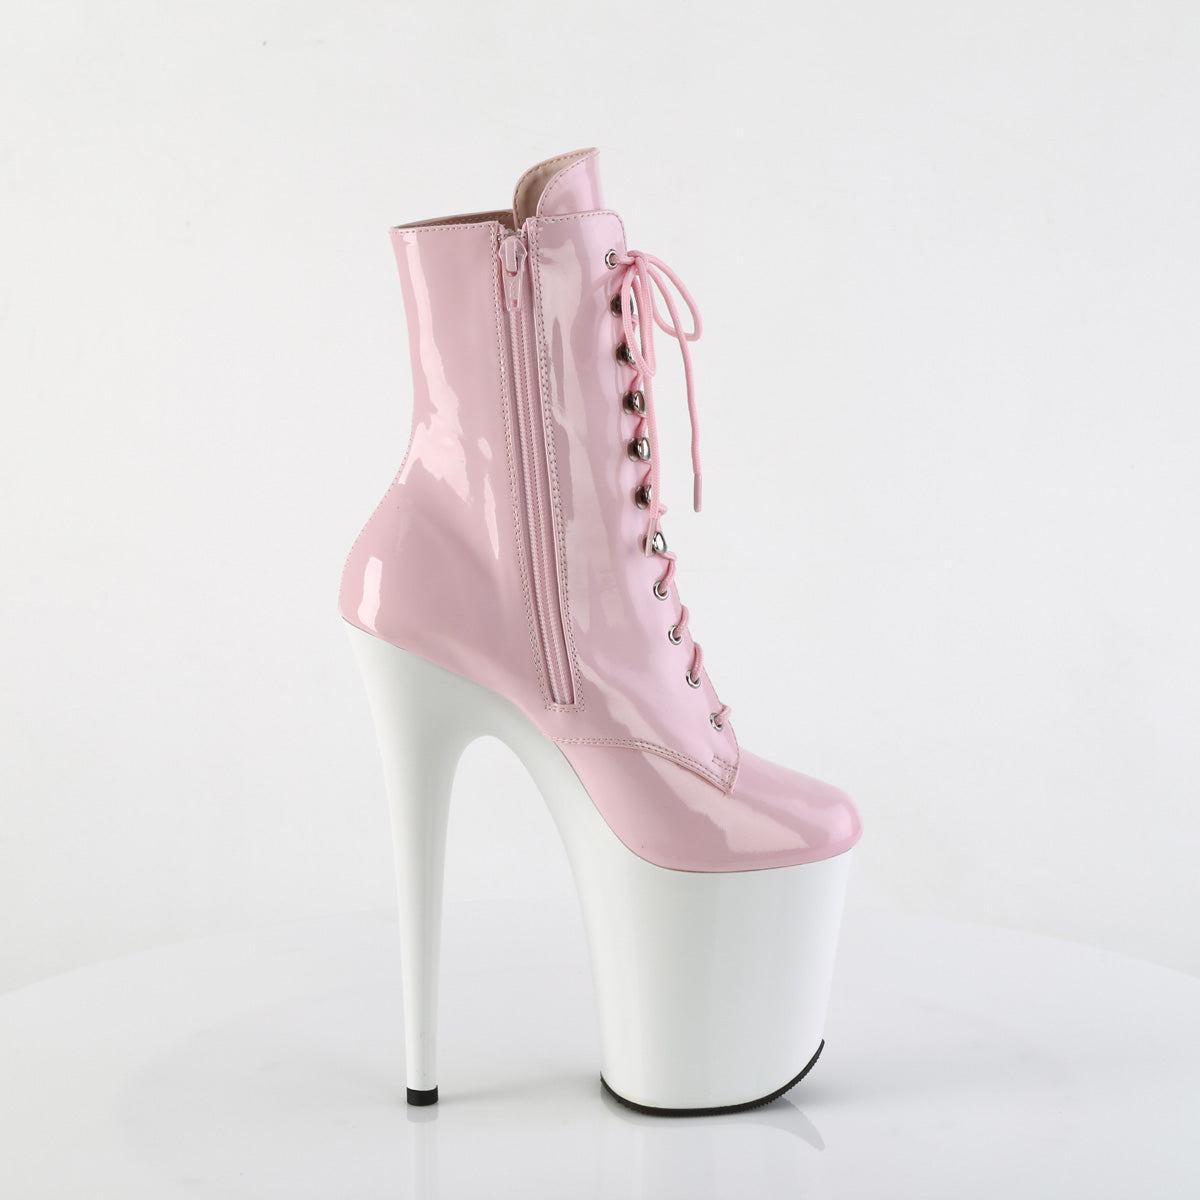 FLAMINGO-1020 Baby Pink Ankle Boots